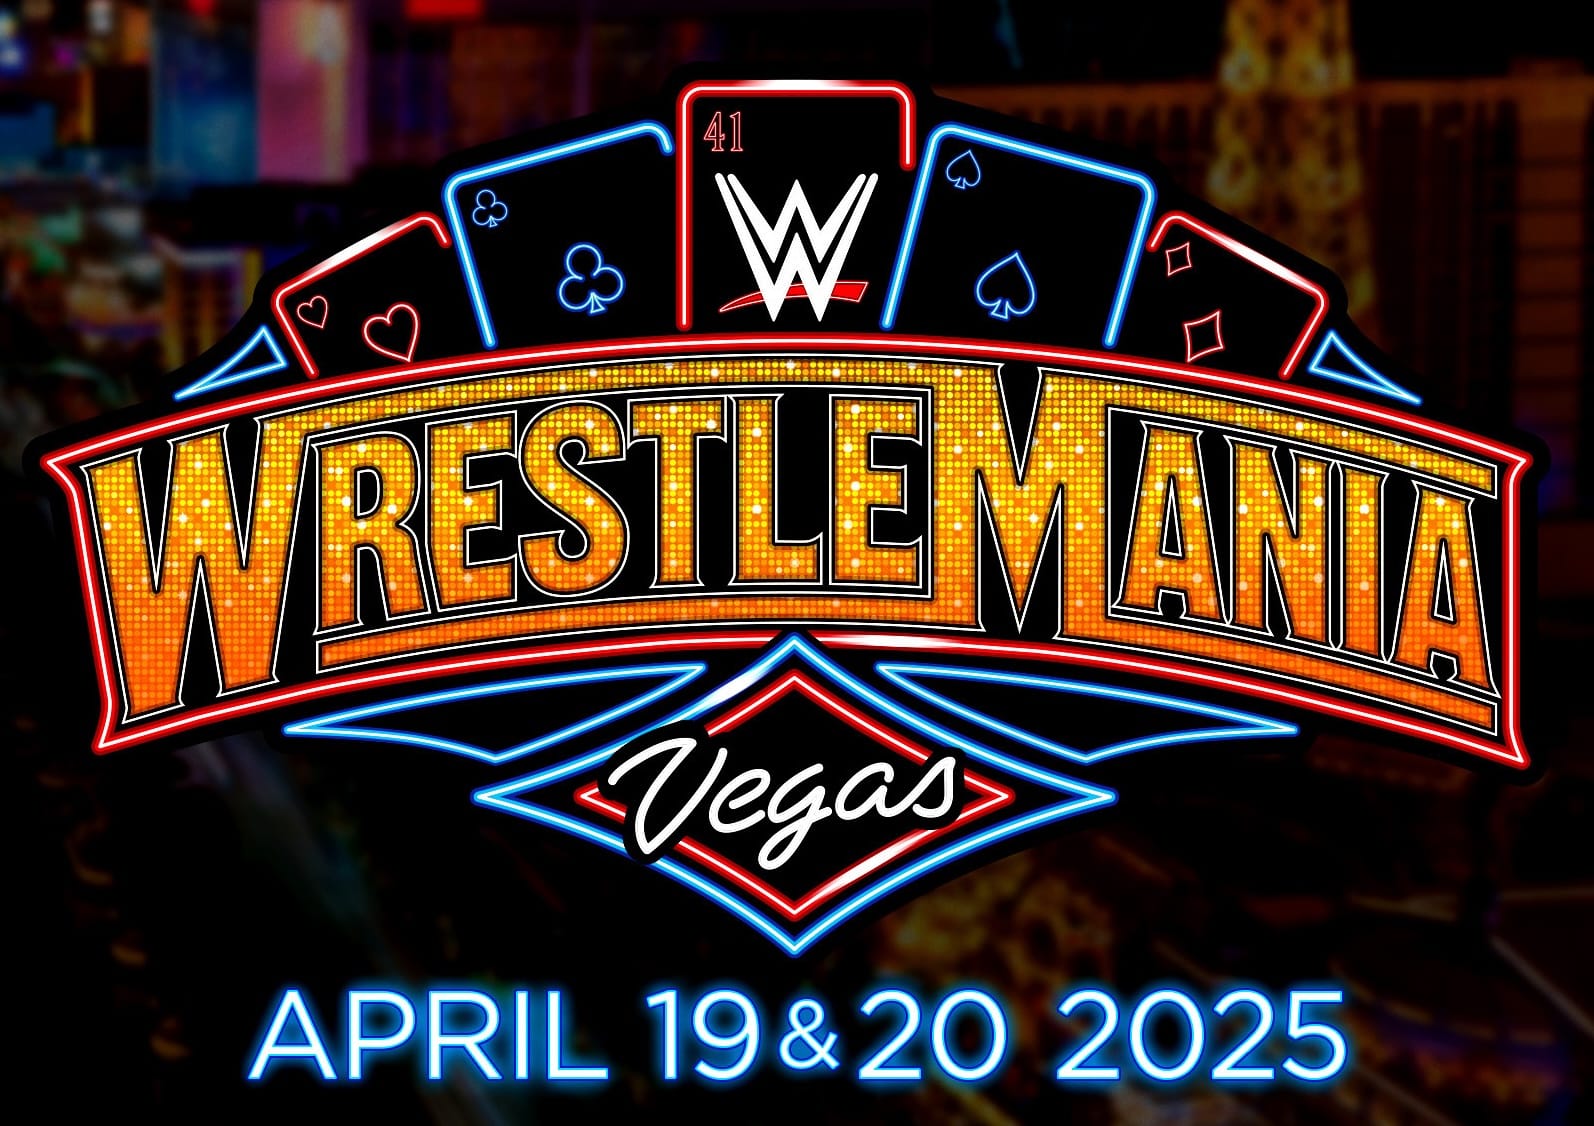 Minnesota Sports CEO Expresses Disappointment Over Minneapolis Losing WrestleMania 41 Bid